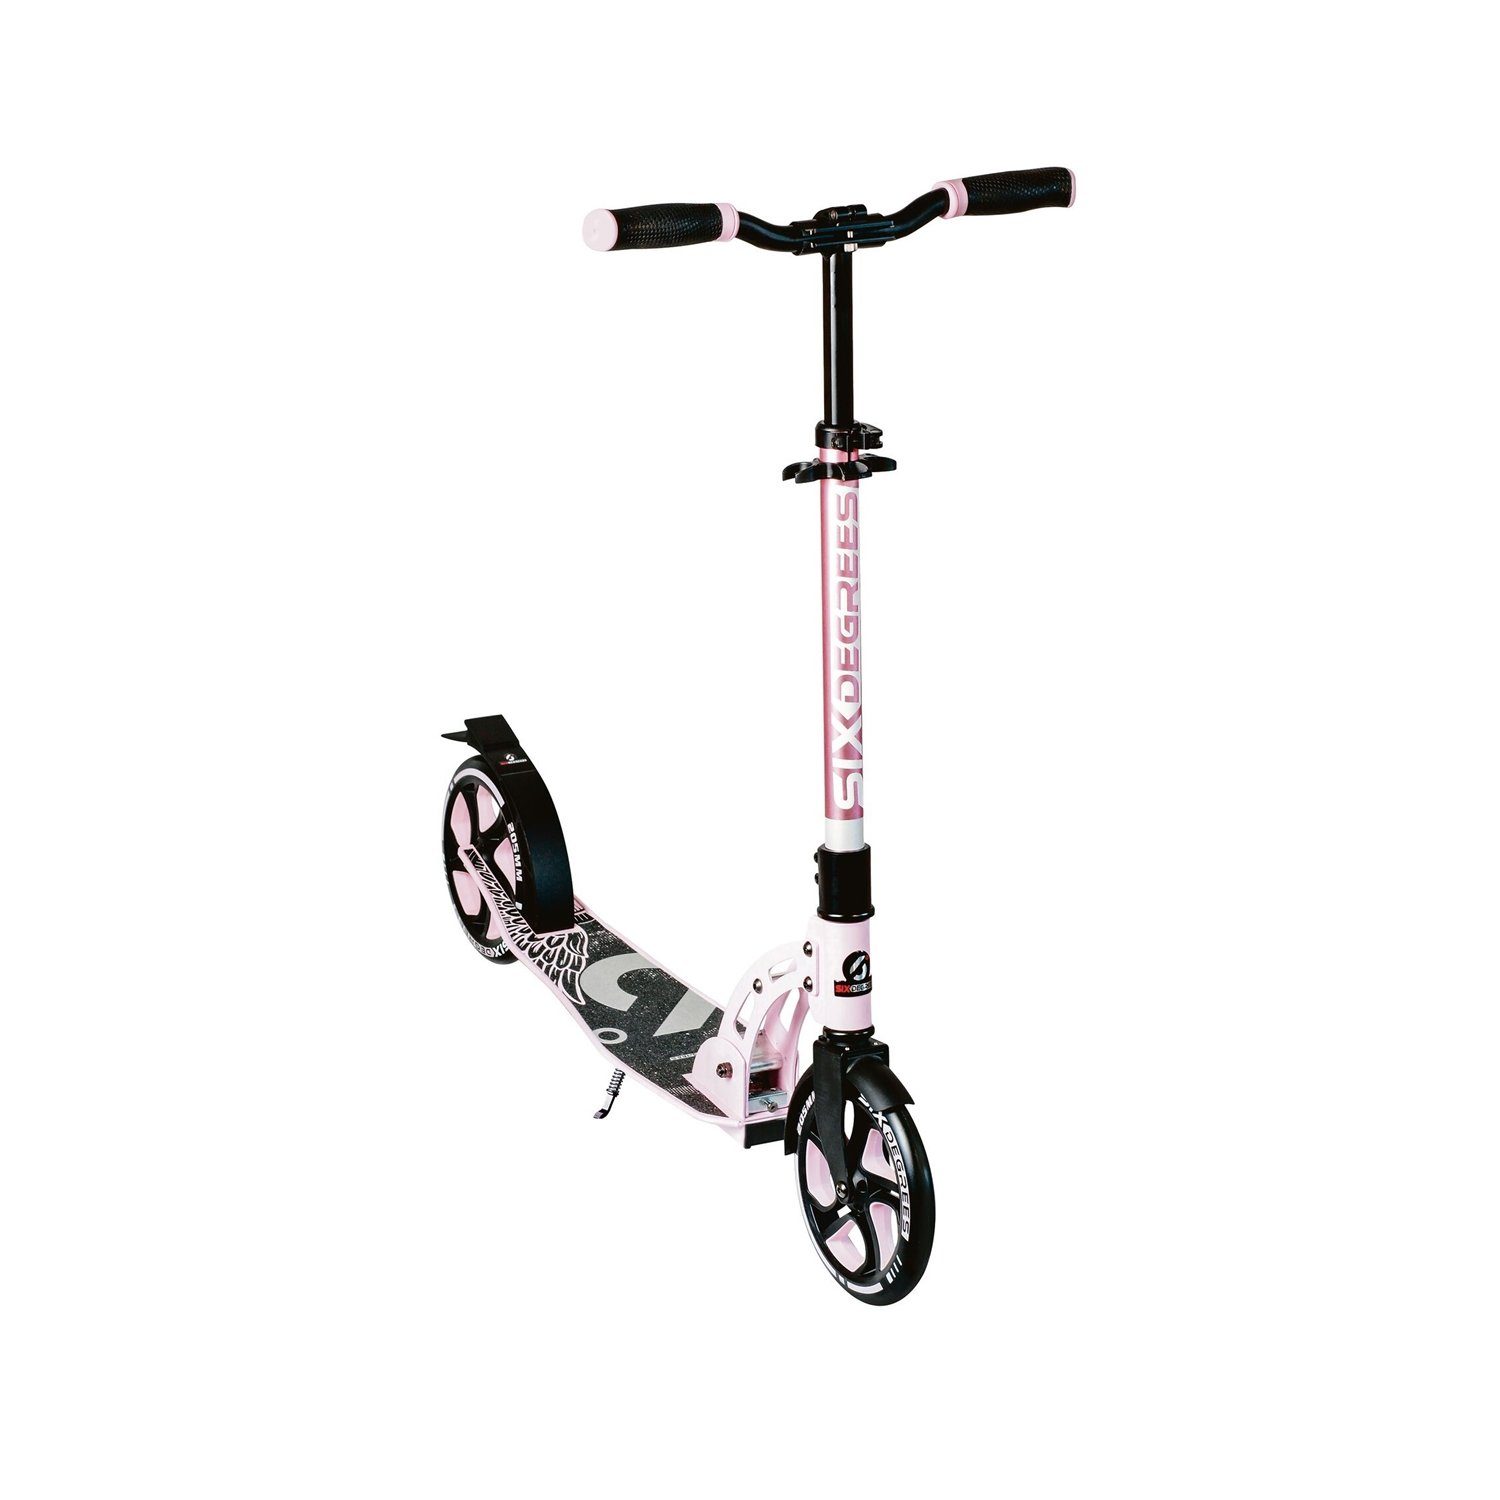 authentic sports & toys Scooter 569 SIX DEGREES Aluminium Scooter 205 mm pastell-pink